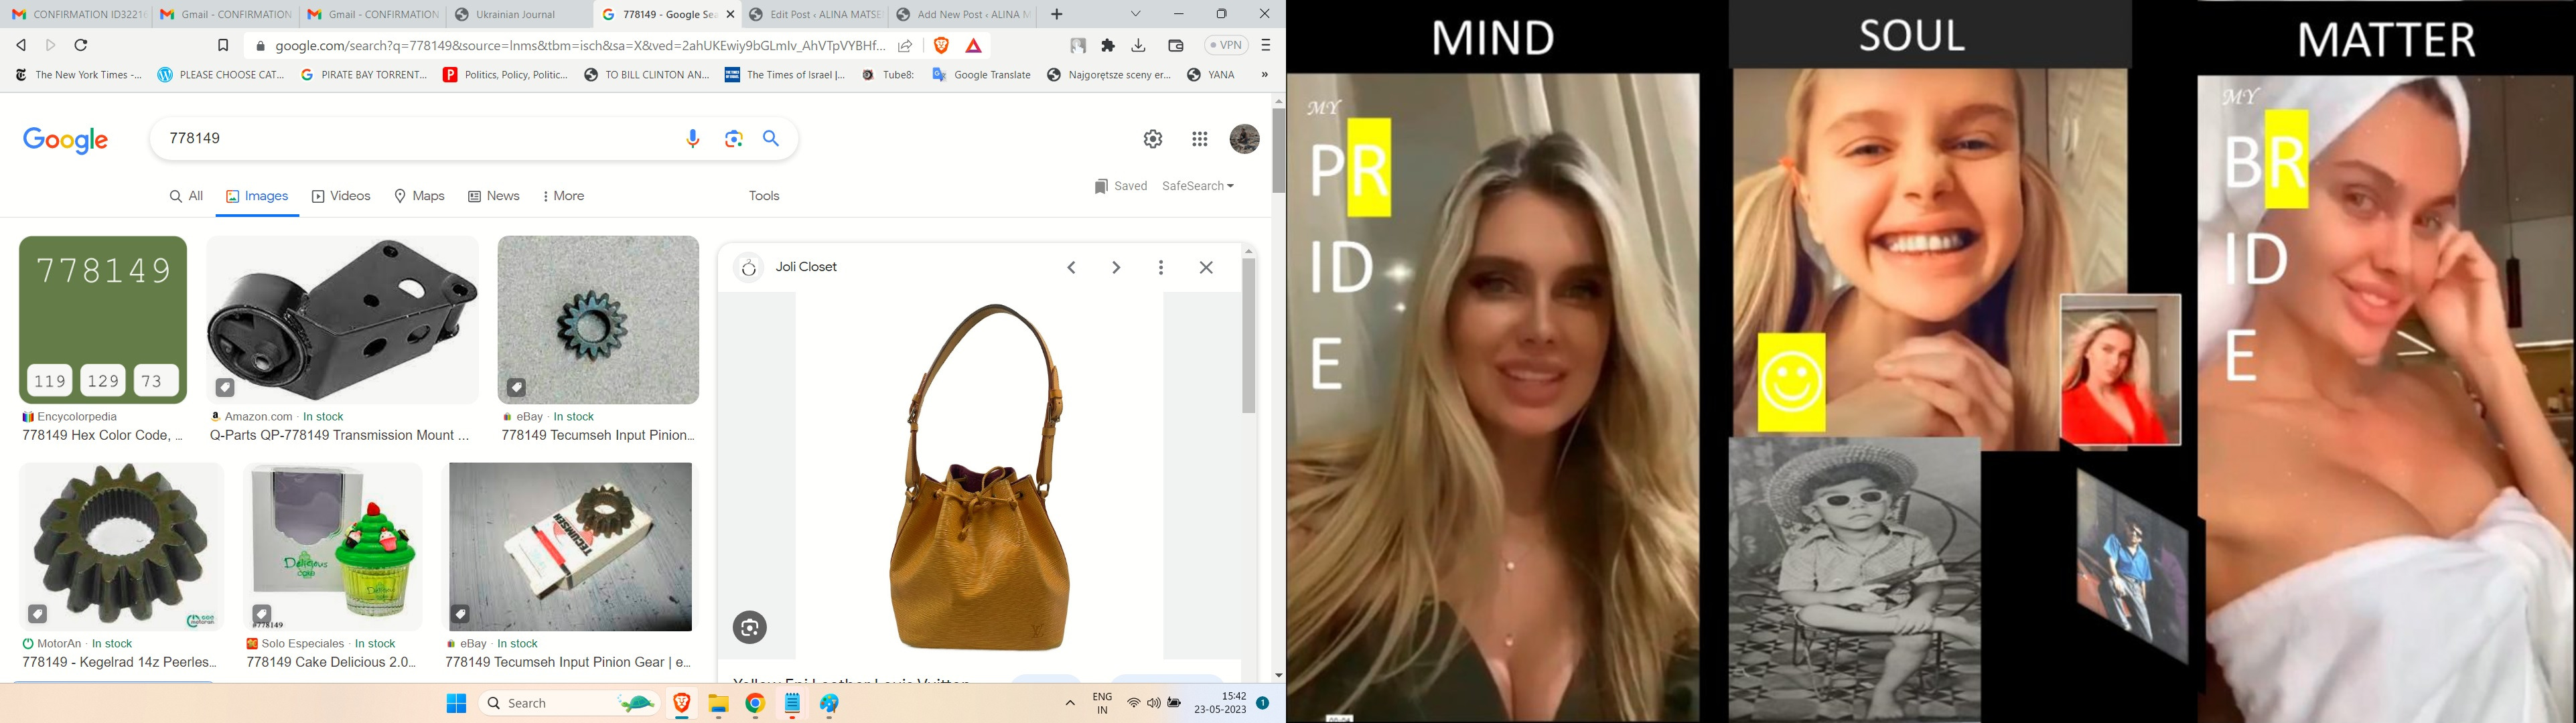 cropped-alina-matsenko-ajay-mishra-collage-mind-matter-soul 778149 Hex Color Code, RGB and Paints -- LLPUIS VOUTTION BAG IS WHO NATALIA NVADIANOVA FROM INSED LVMH BAG YELOW U EMAN MAADRHOD